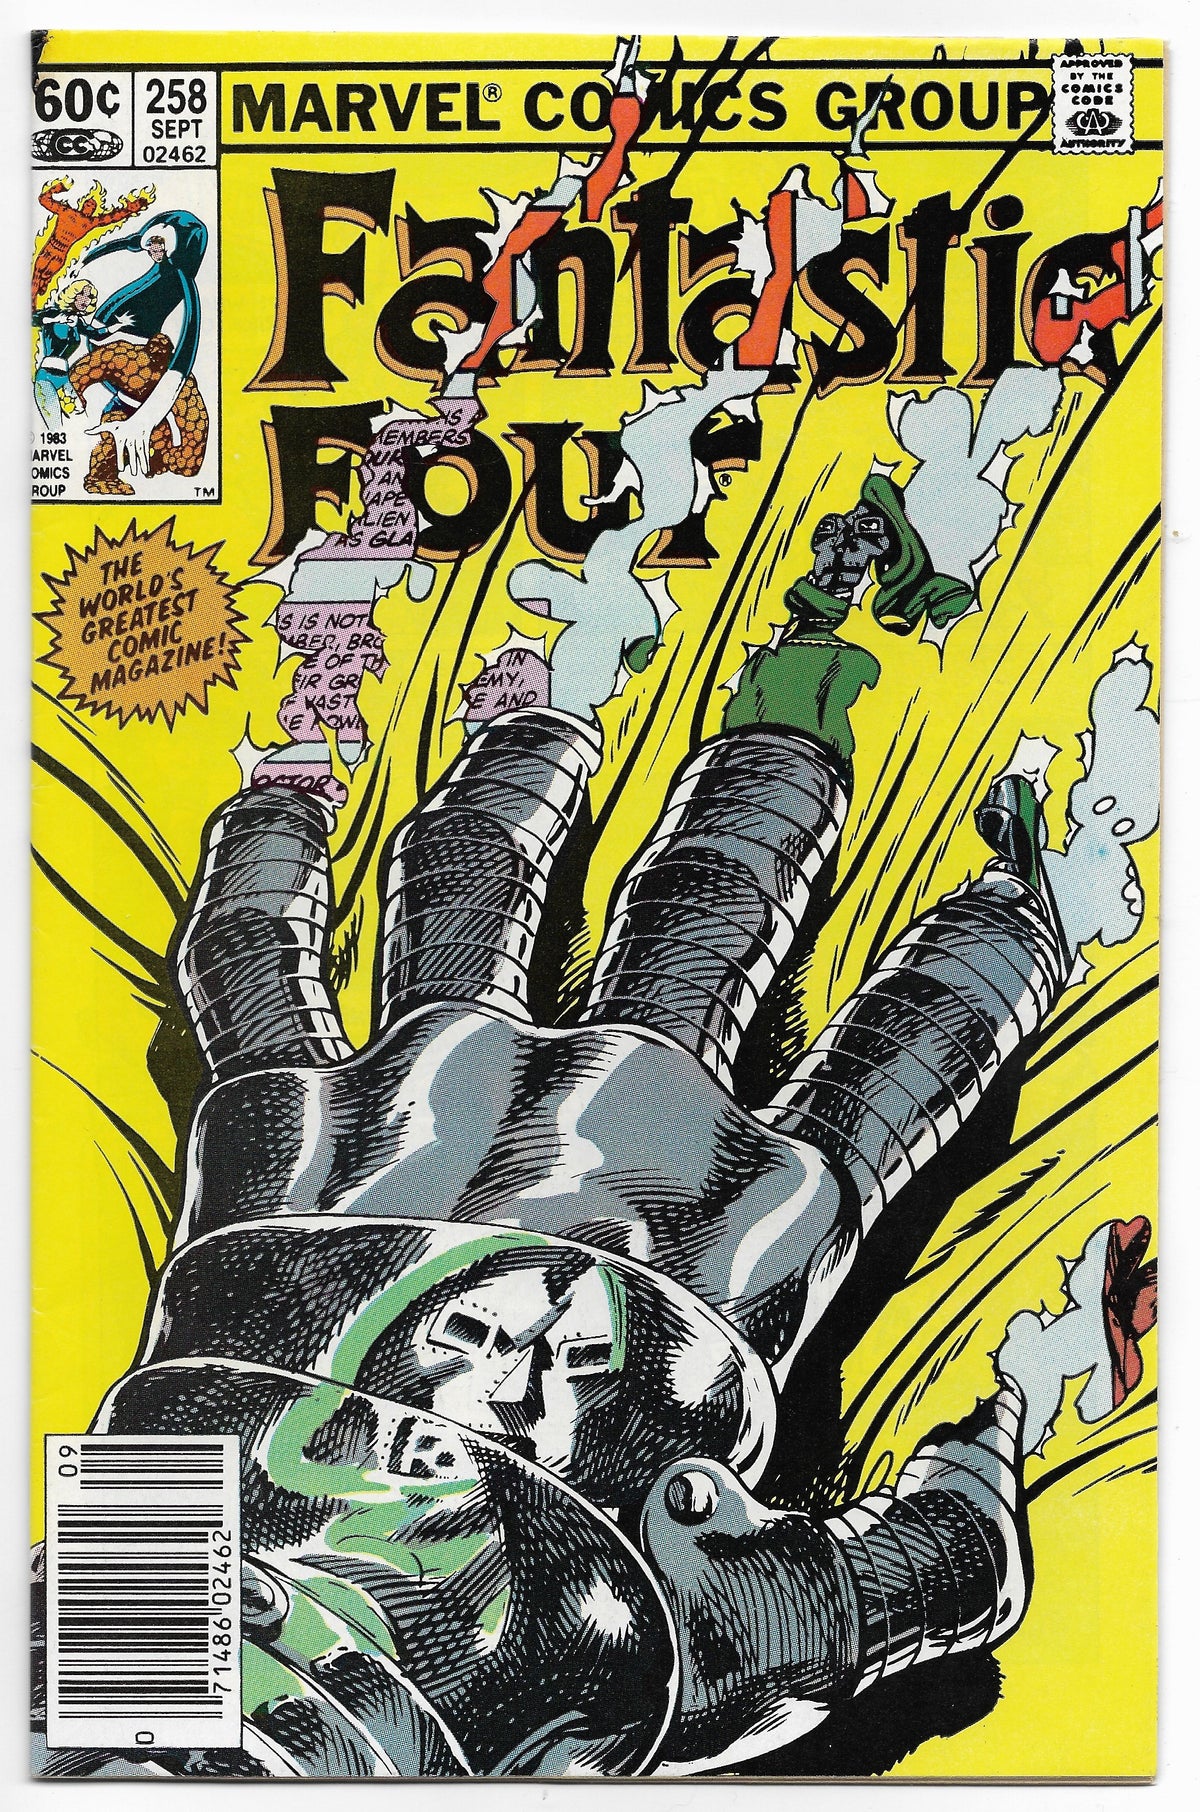 Photo of Fantastic Four, Vol. 1 (1983)  Iss 258A Very Fine +  Comic sold by Stronghold Collectibles